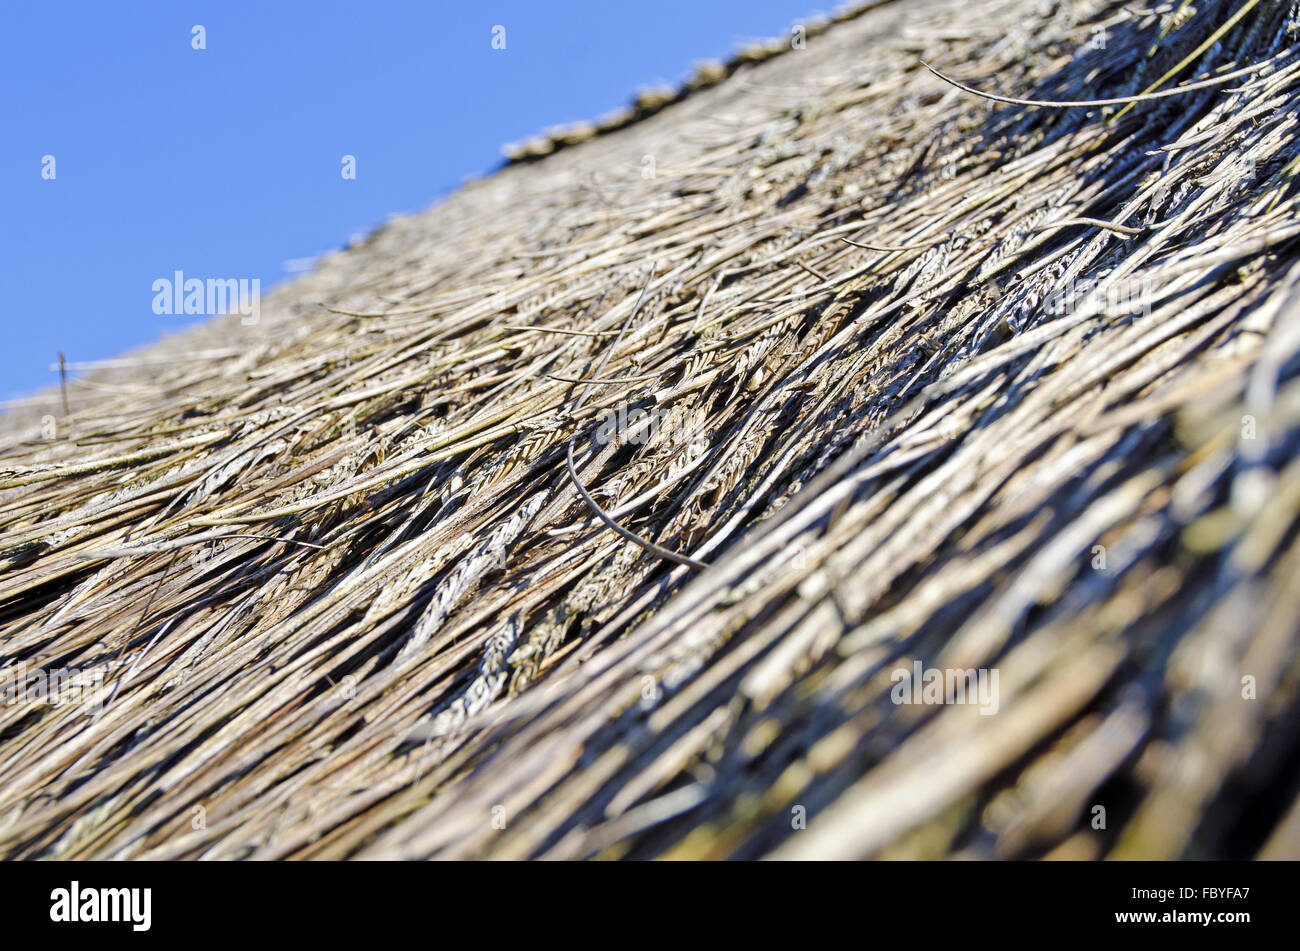 thatched roof with stray ears of corn Stock Photo